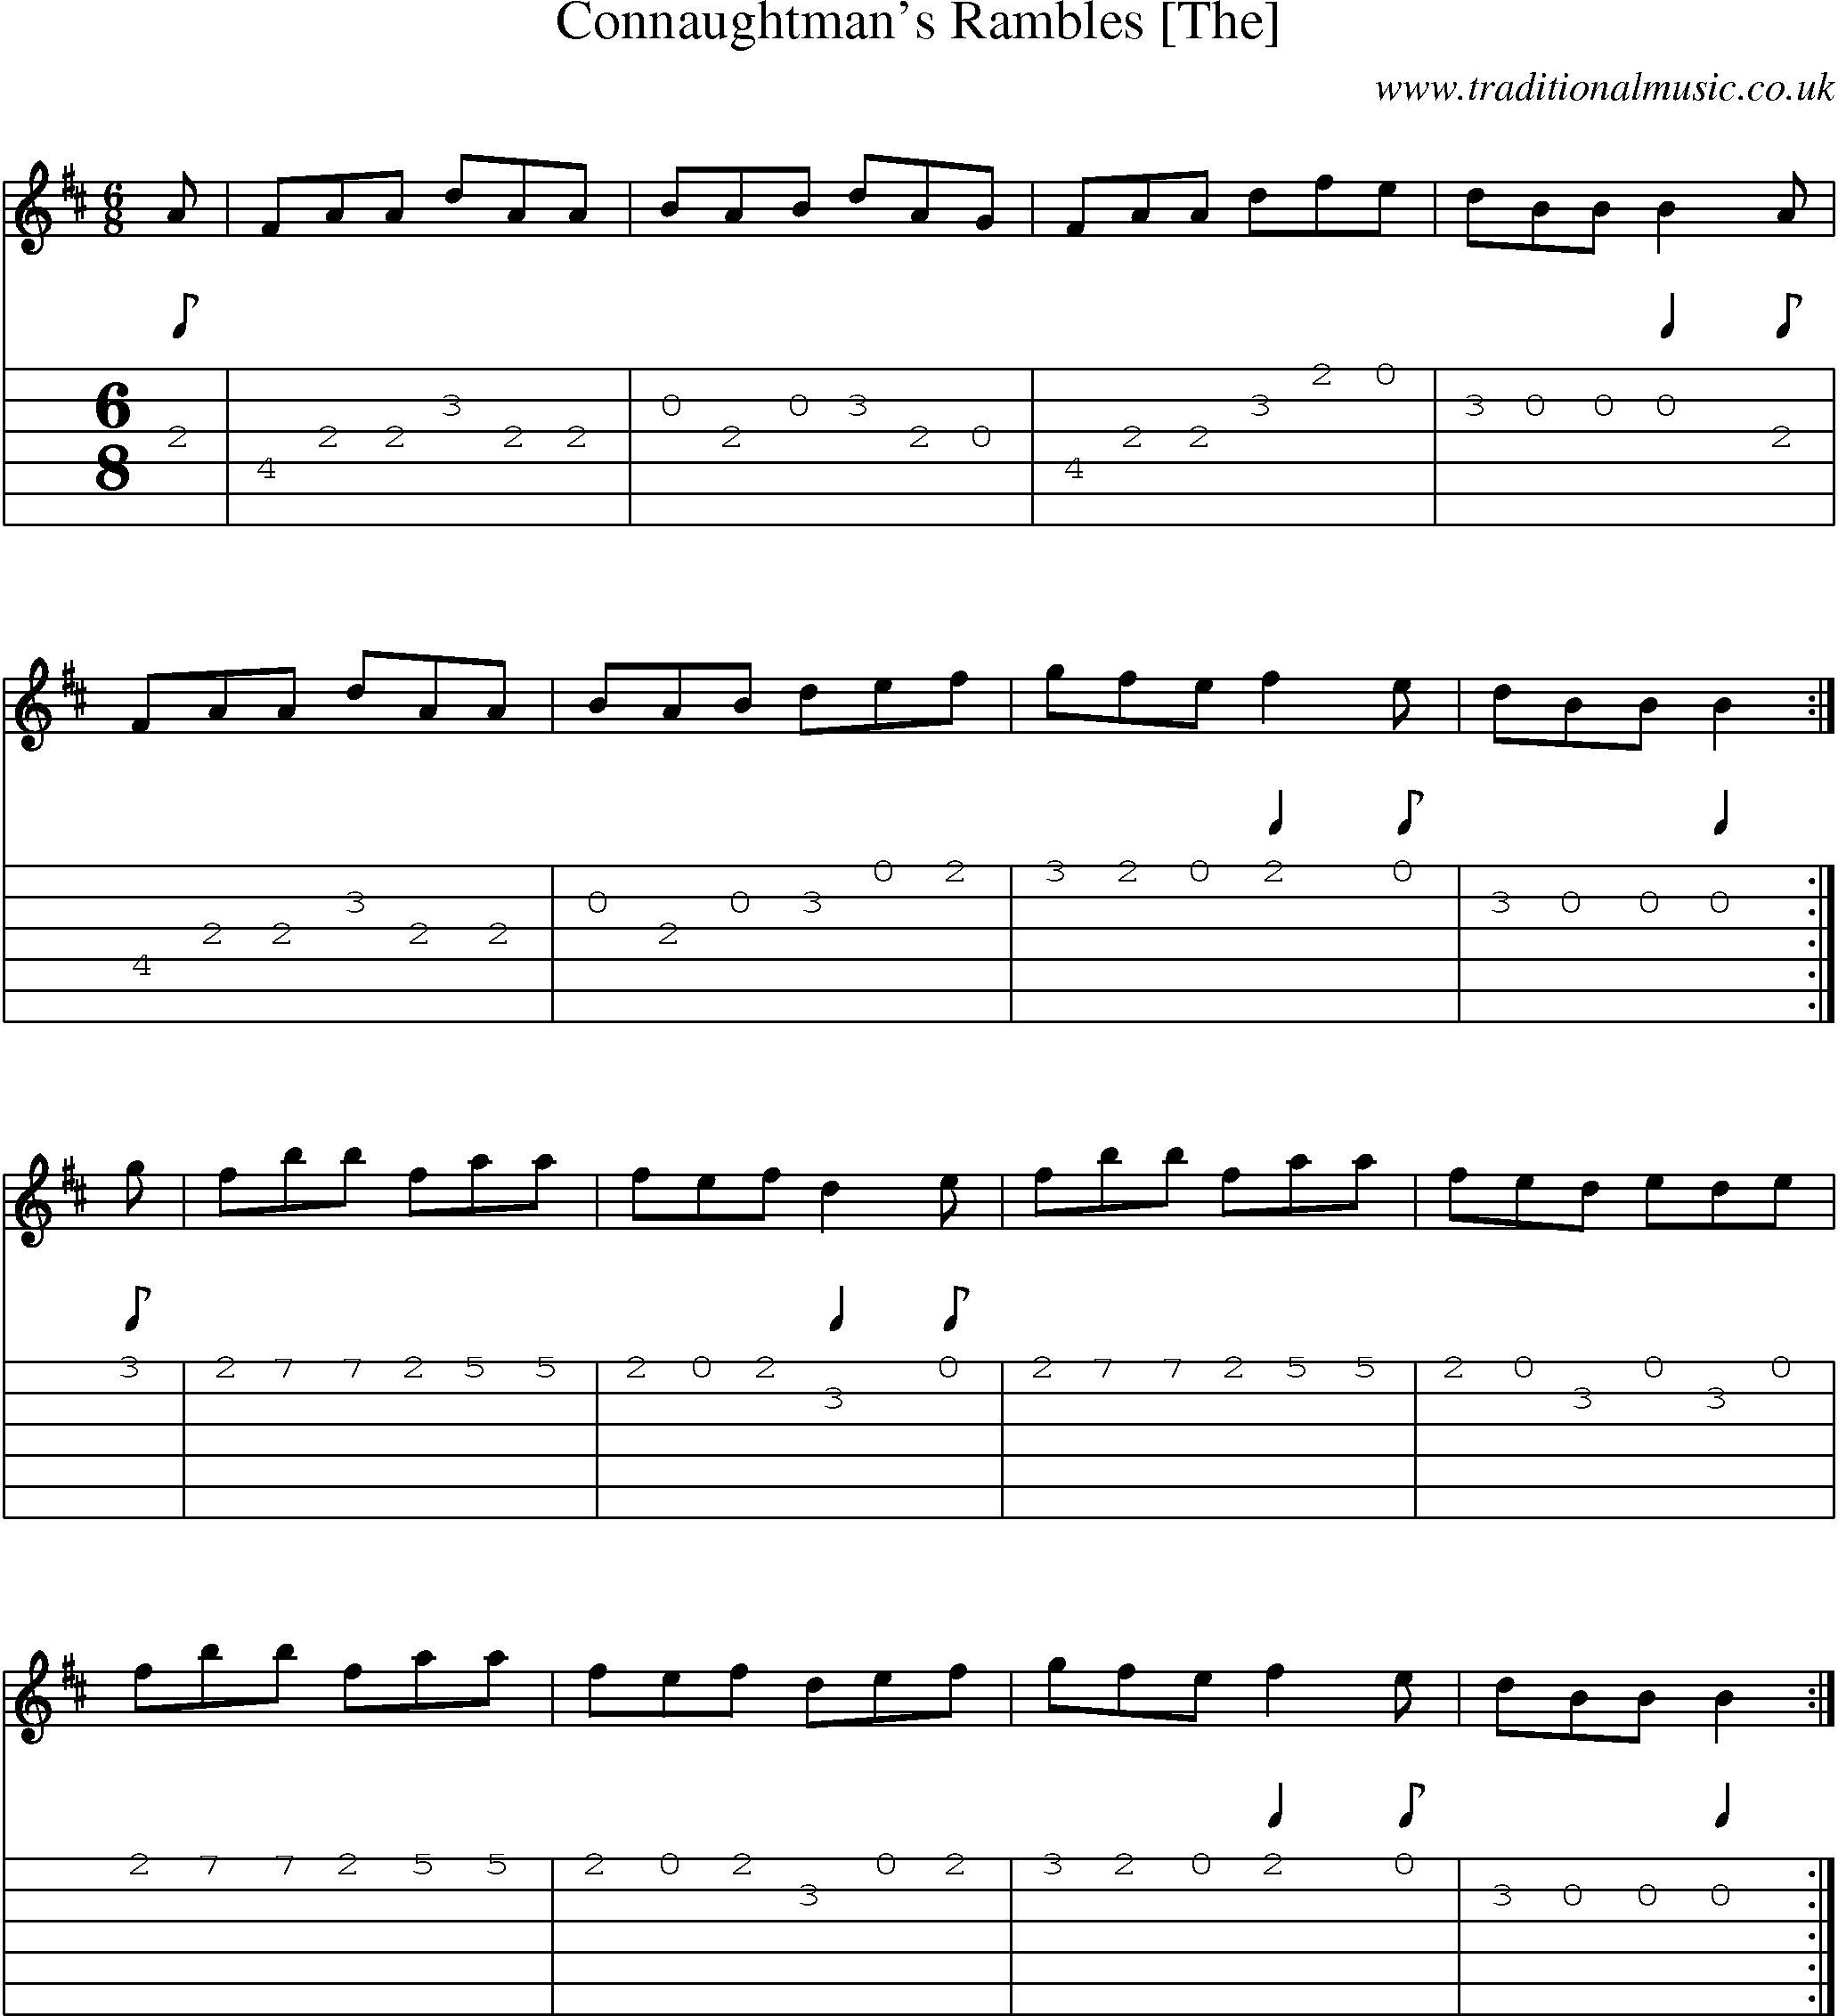 Music Score and Guitar Tabs for Connaughtmans Rambles